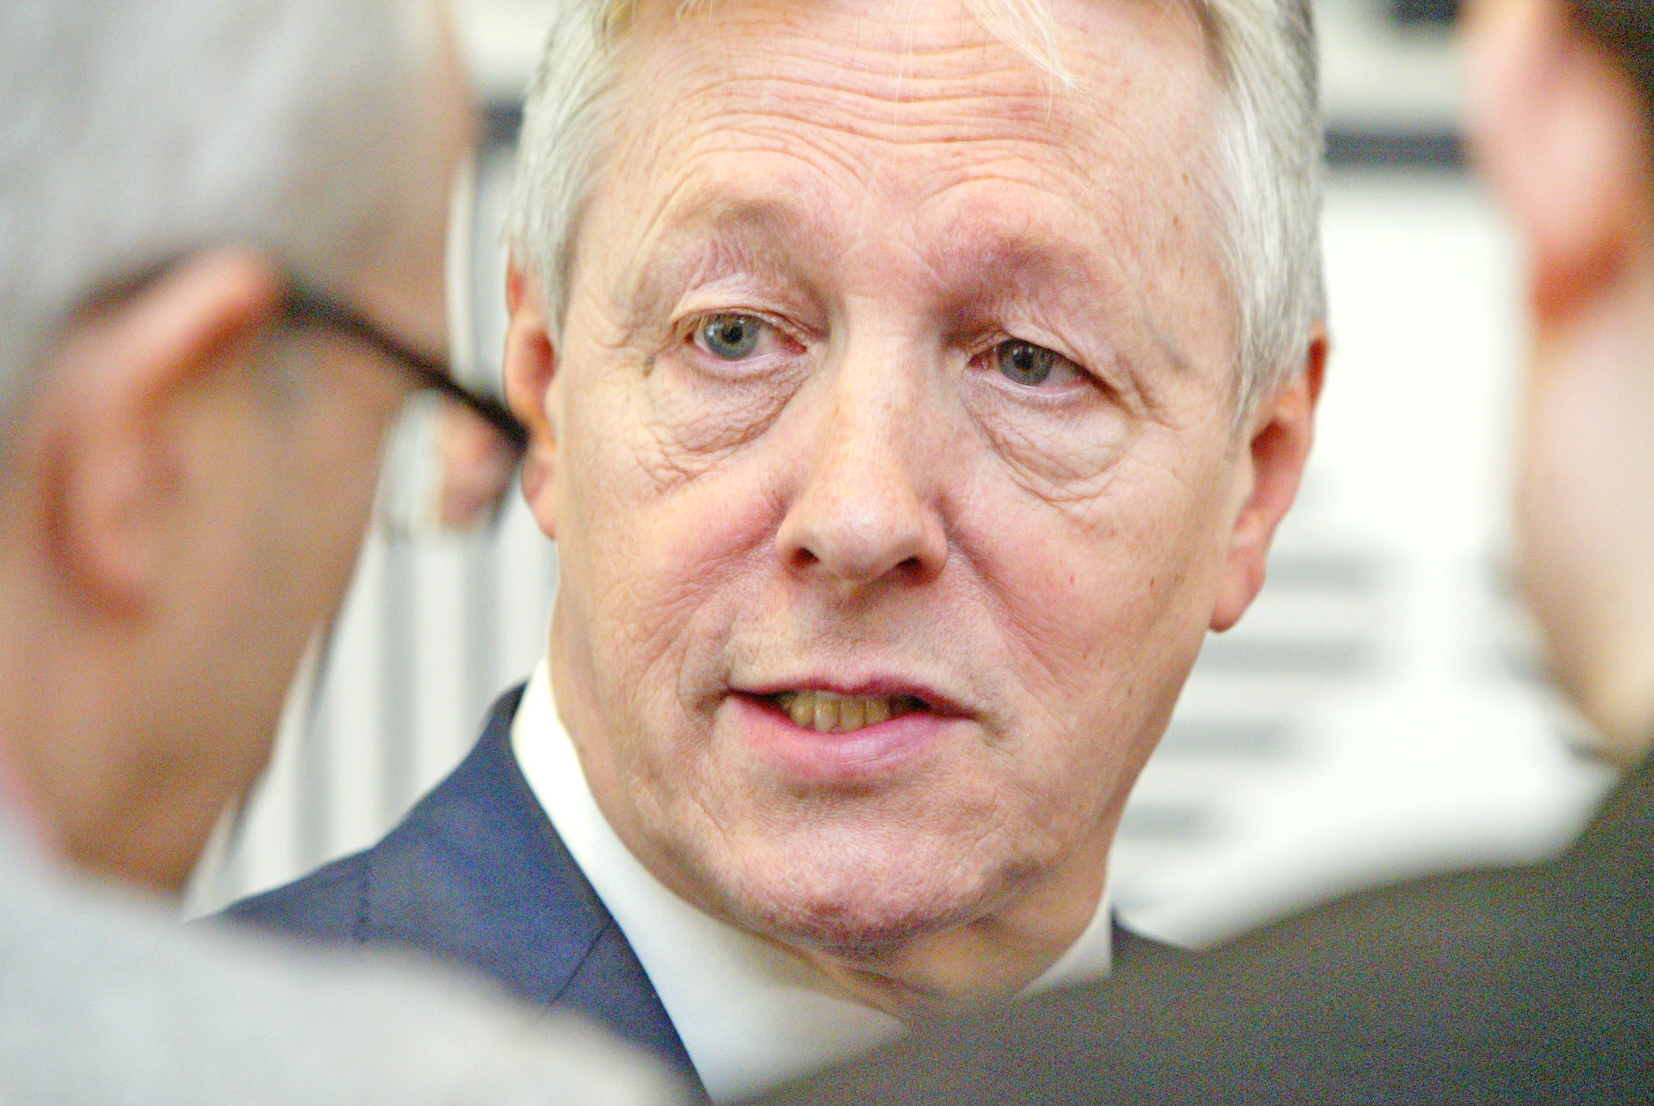 DUP leader Peter Robinson says he’ll lead his party back into full government if the report says the IRA didn’t sanction the murder of Kevin McGuigan